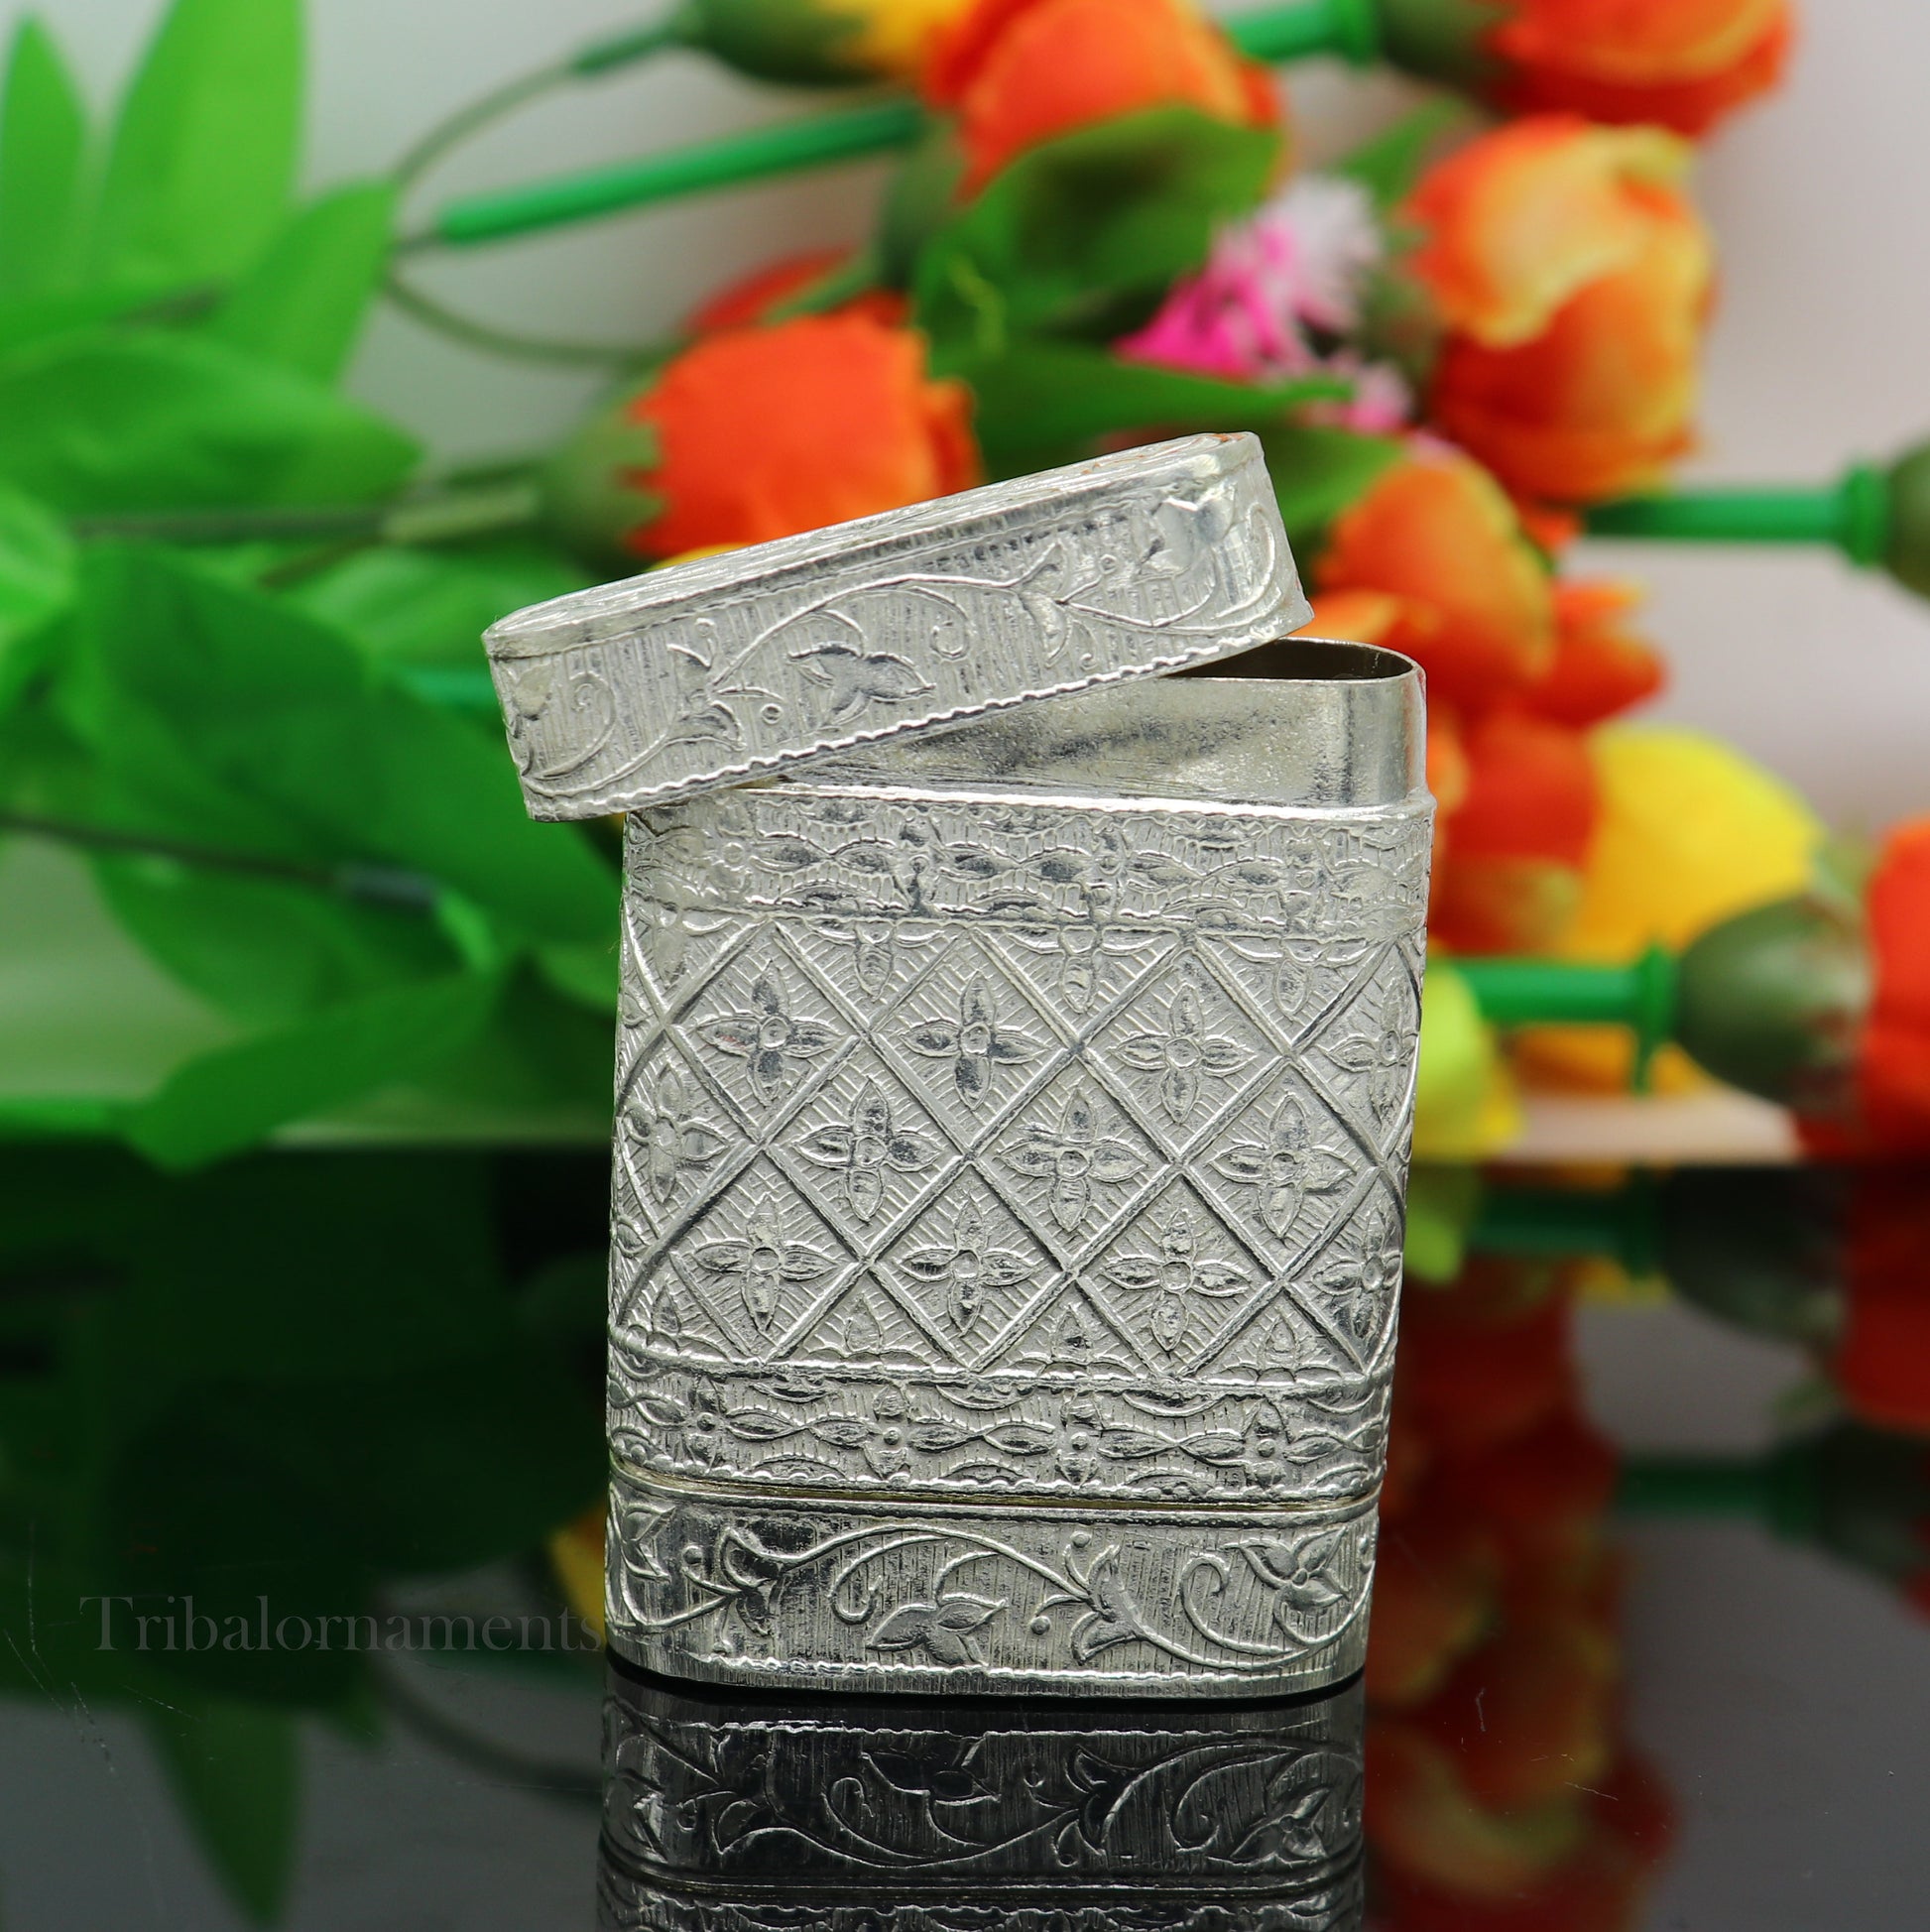 925 sterling silver floral design 2 in1 Royal trinket box, tobacco box, tobacco chuna box, best gifting silver royal article stb312 - TRIBAL ORNAMENTS